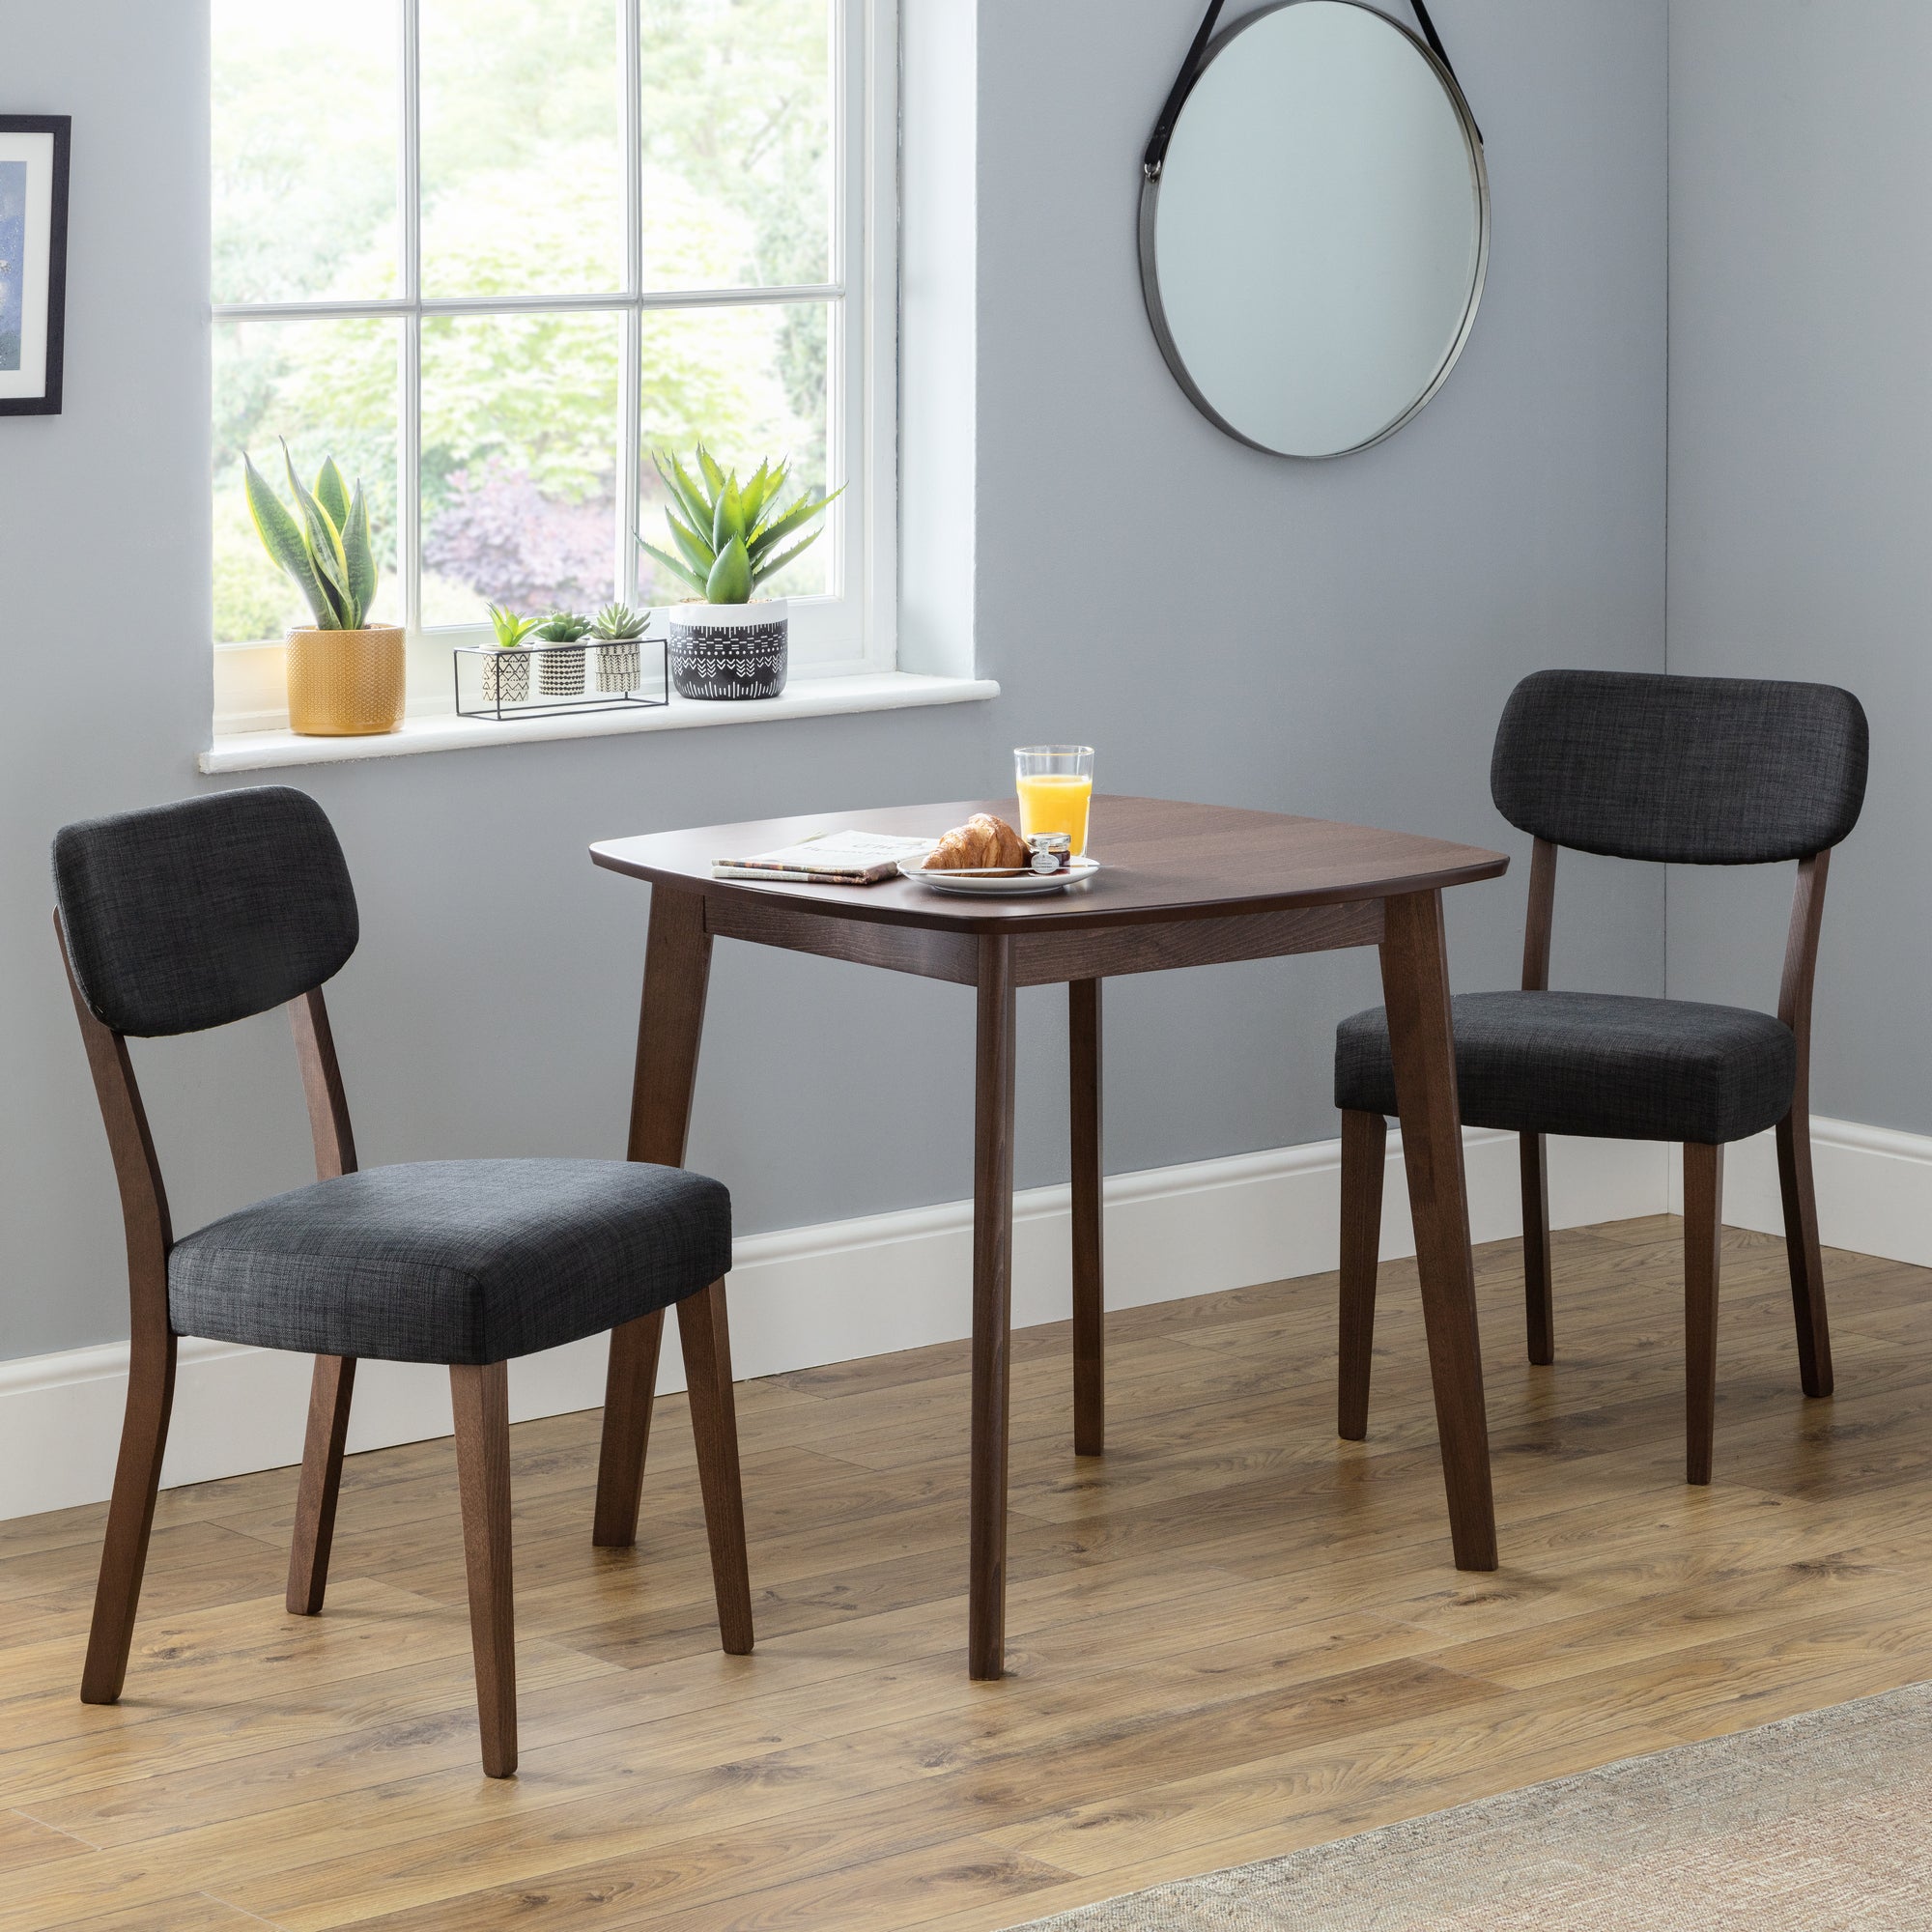 Photos - Sofa Lennox Square Dining Table with 2 Farringdon Chairs, Beech Wood Brown 